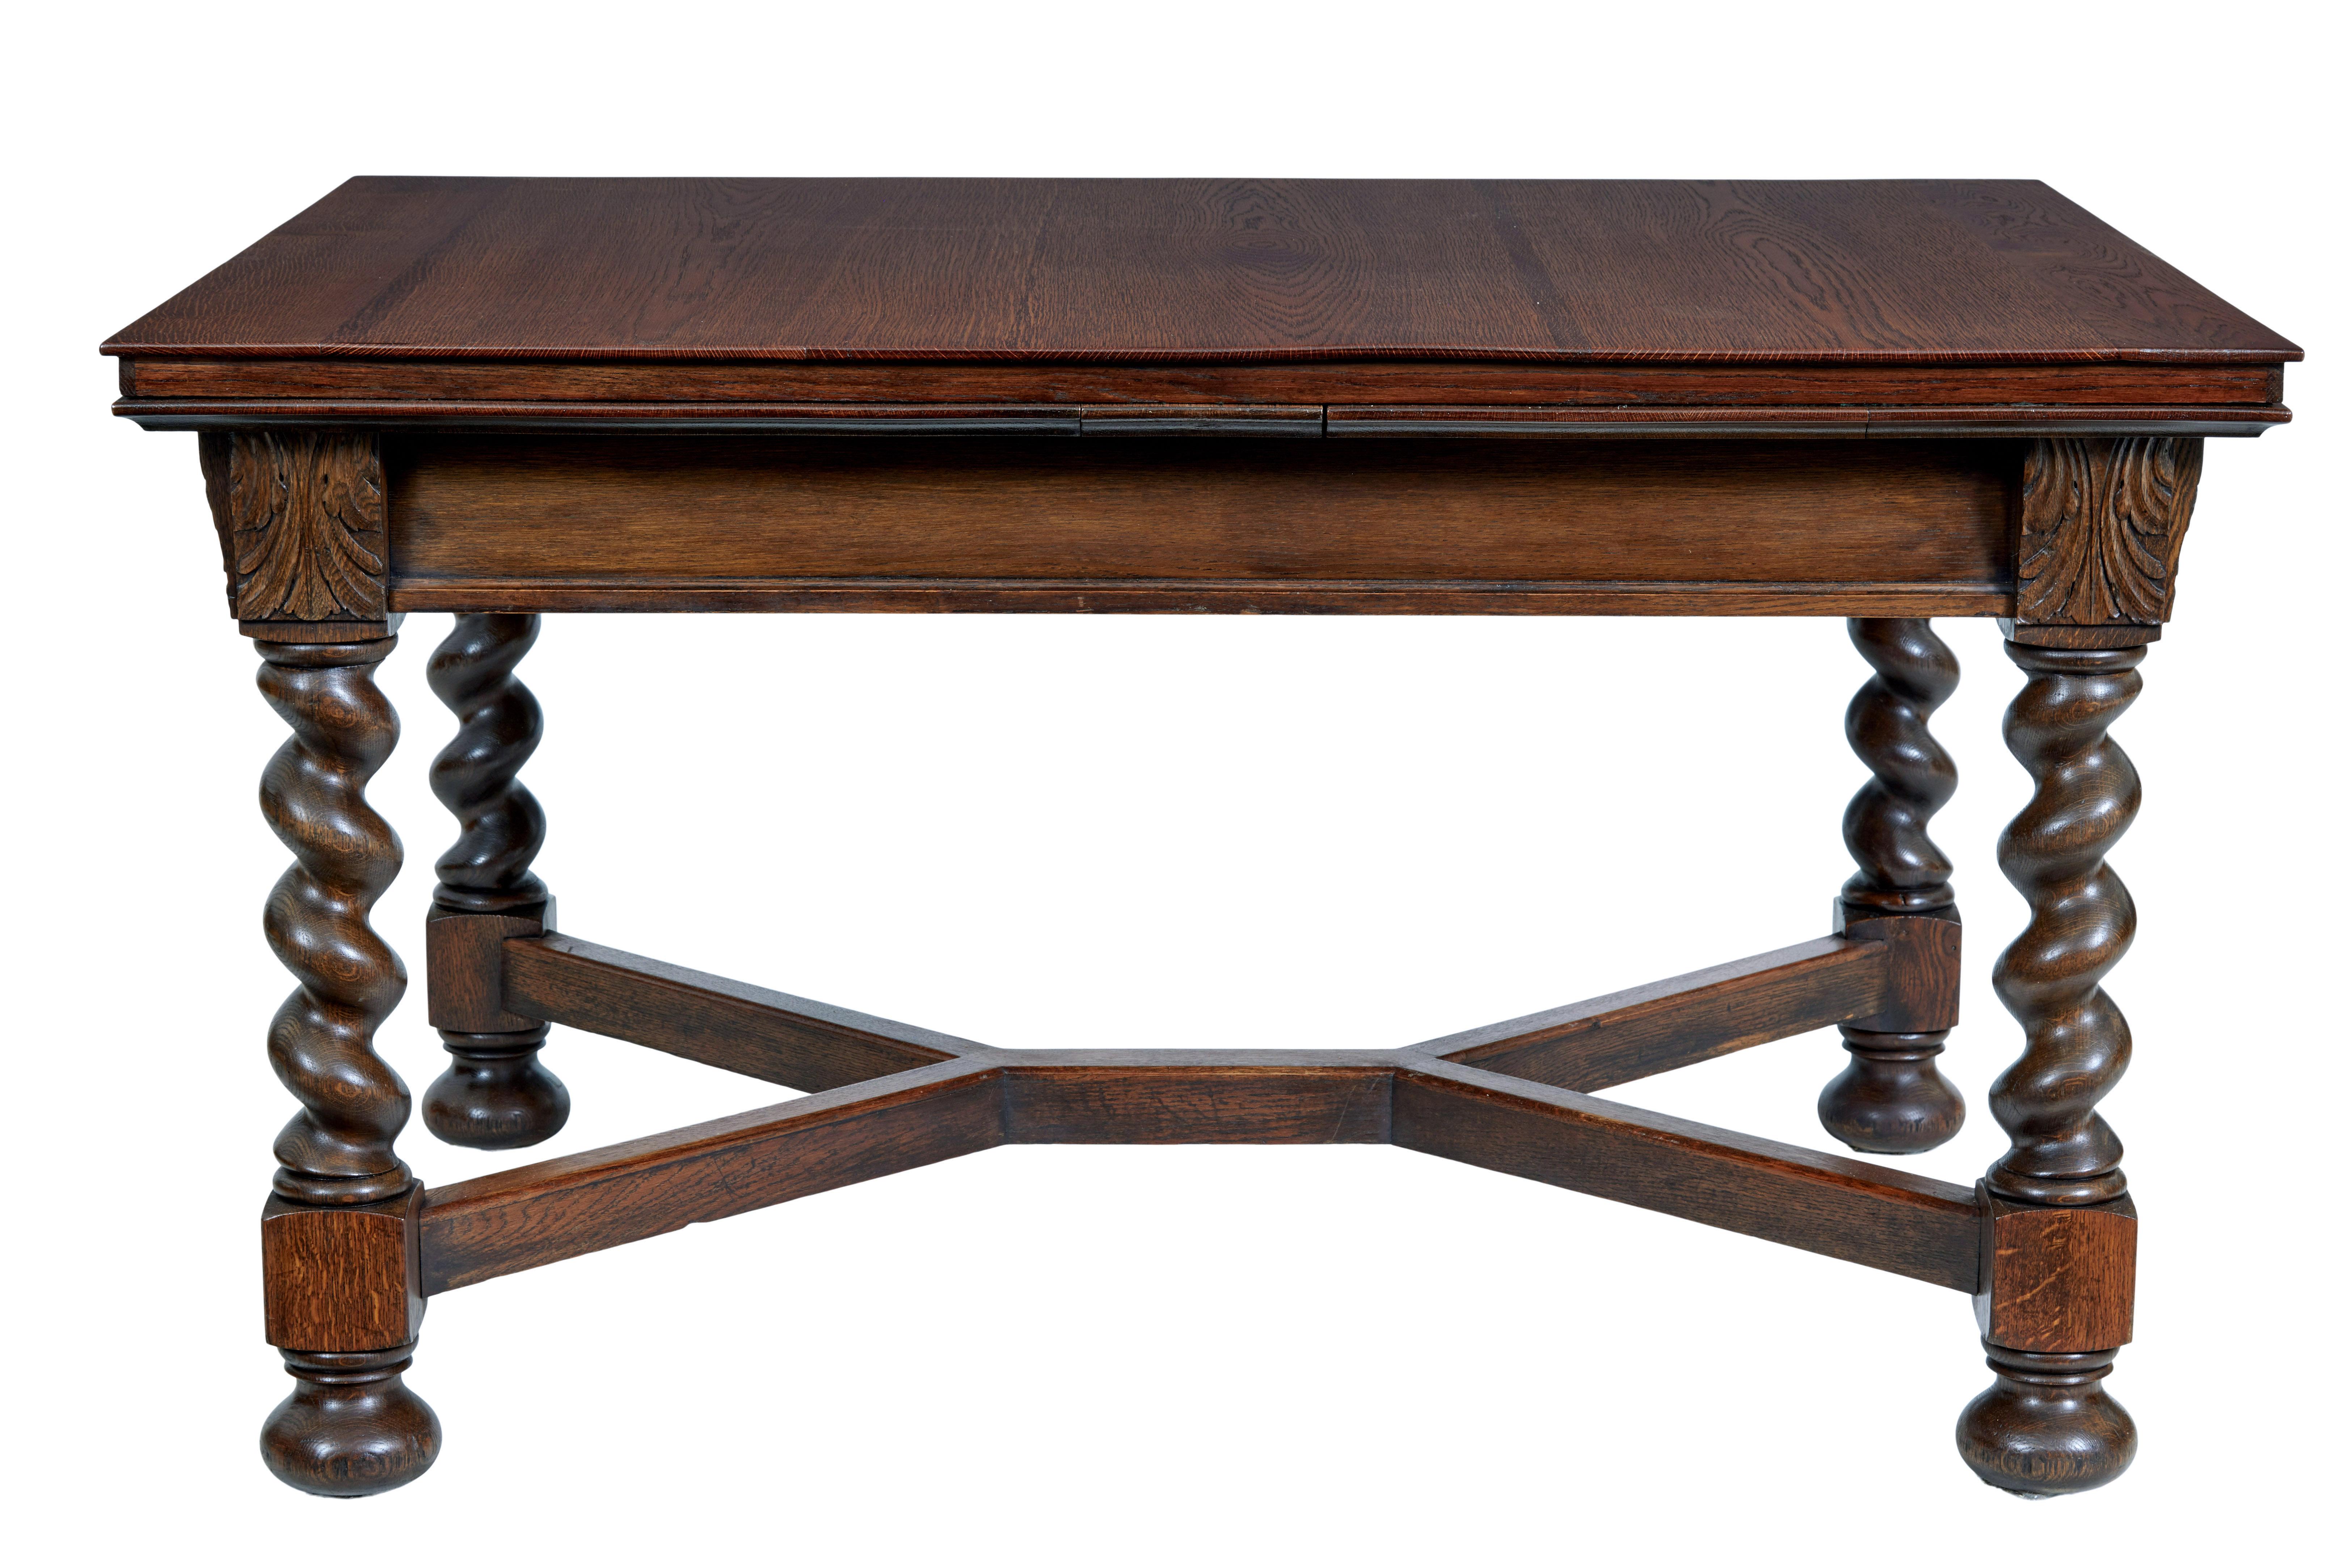 Early 20th century baroque revival oak extending dining table circa 1900.

Swedish made oak drawleaf table, with a pull out pine slide each end, to allow this table to seat a comfortable 10.  Carved acanthus leaf detail on each corner of the apron. 